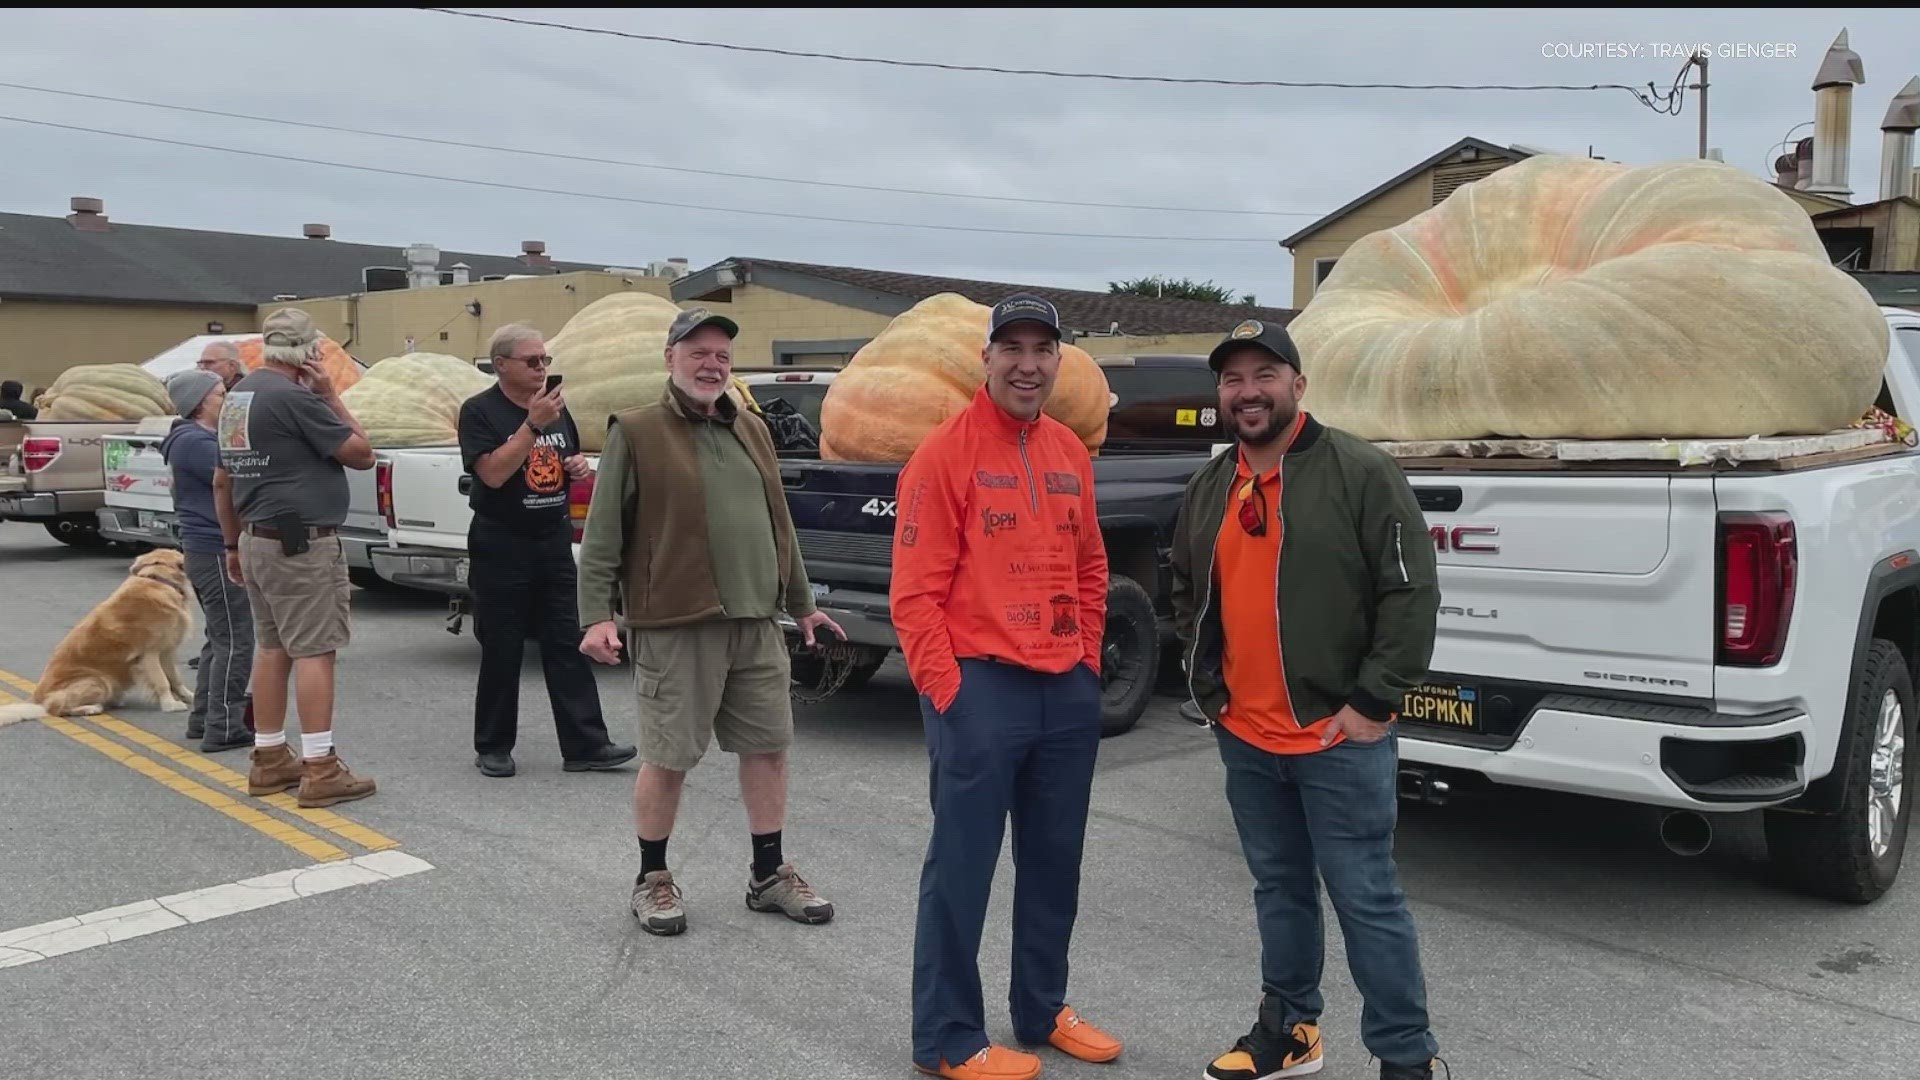 Travis Gienger won the 50th World Championship Pumpkin Weigh-Off in Half Moon Bay with an enormous, lumpy, orange pump that could produce at least 687 pies.